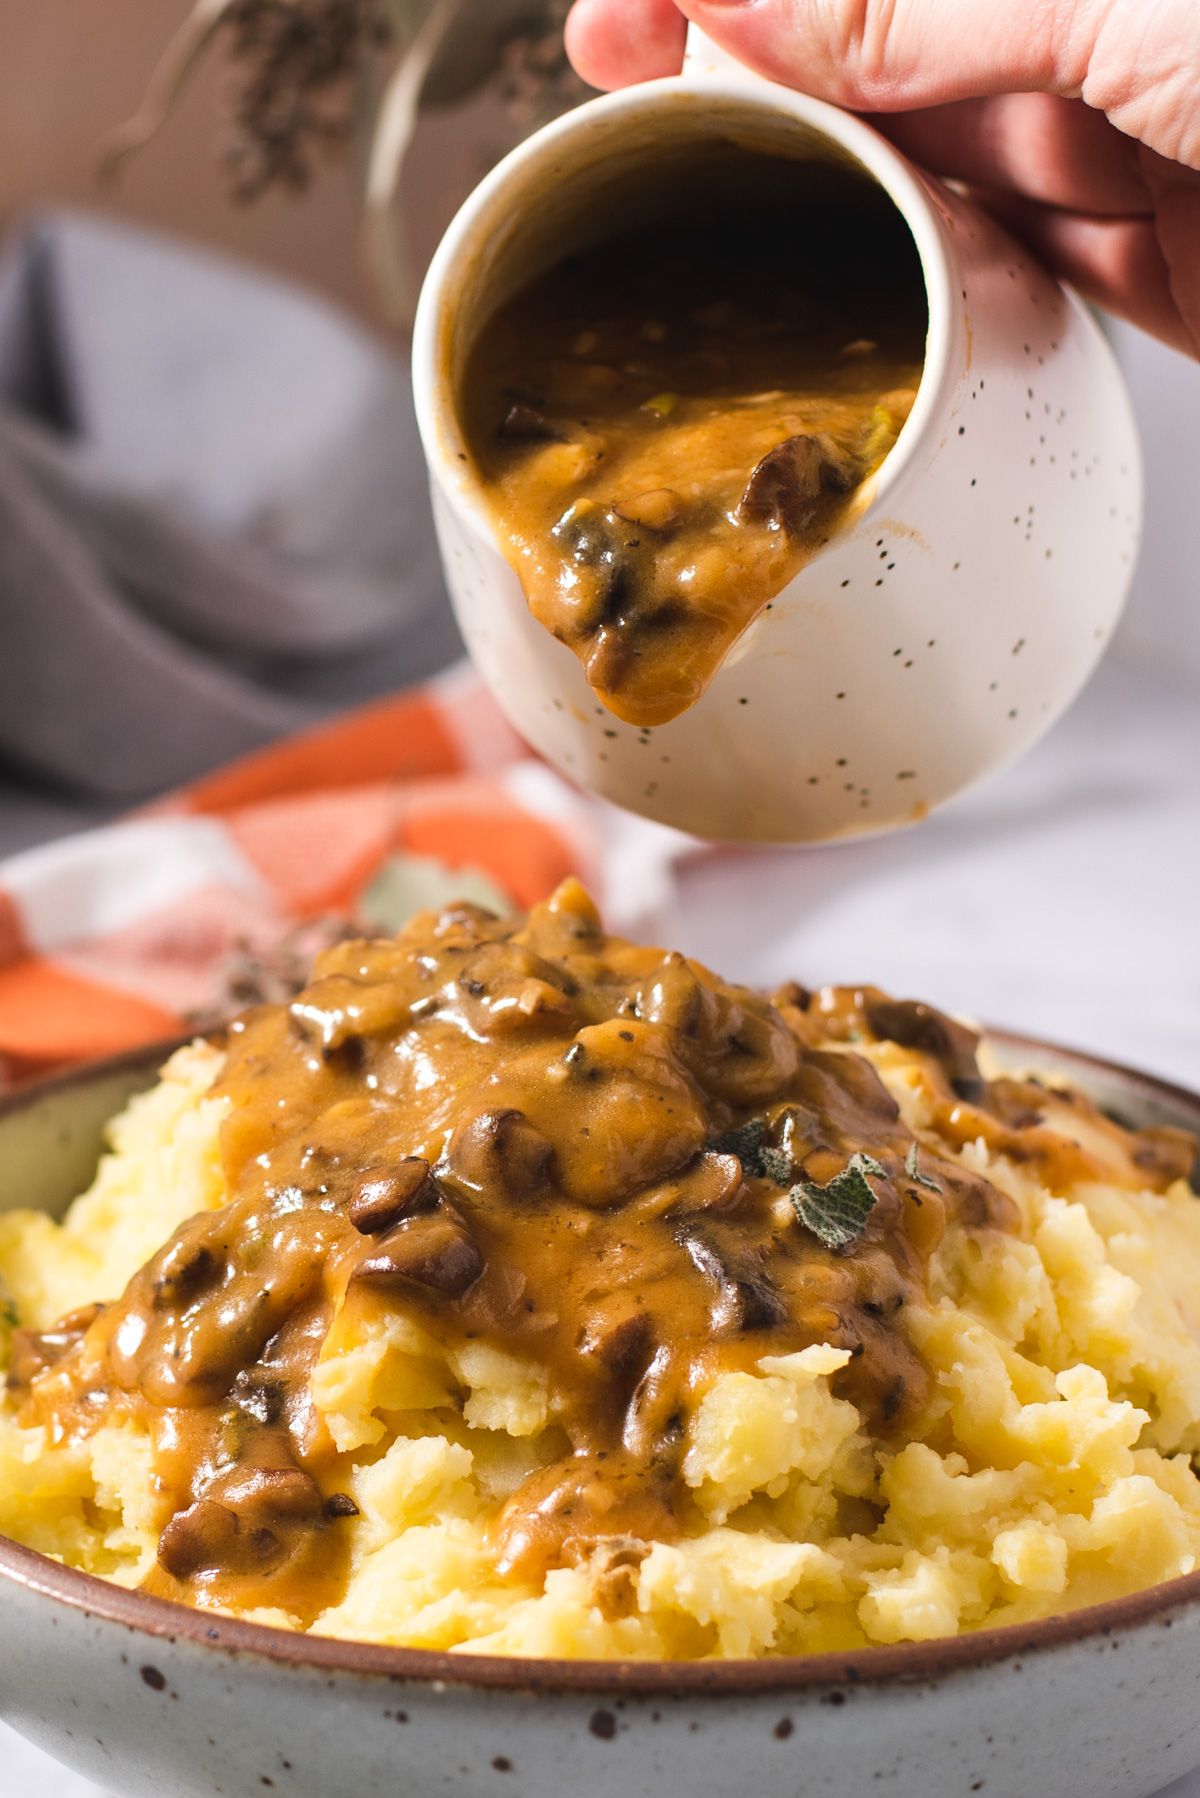 a jug of mushroom gravy being poured onto a plate of mashed potato